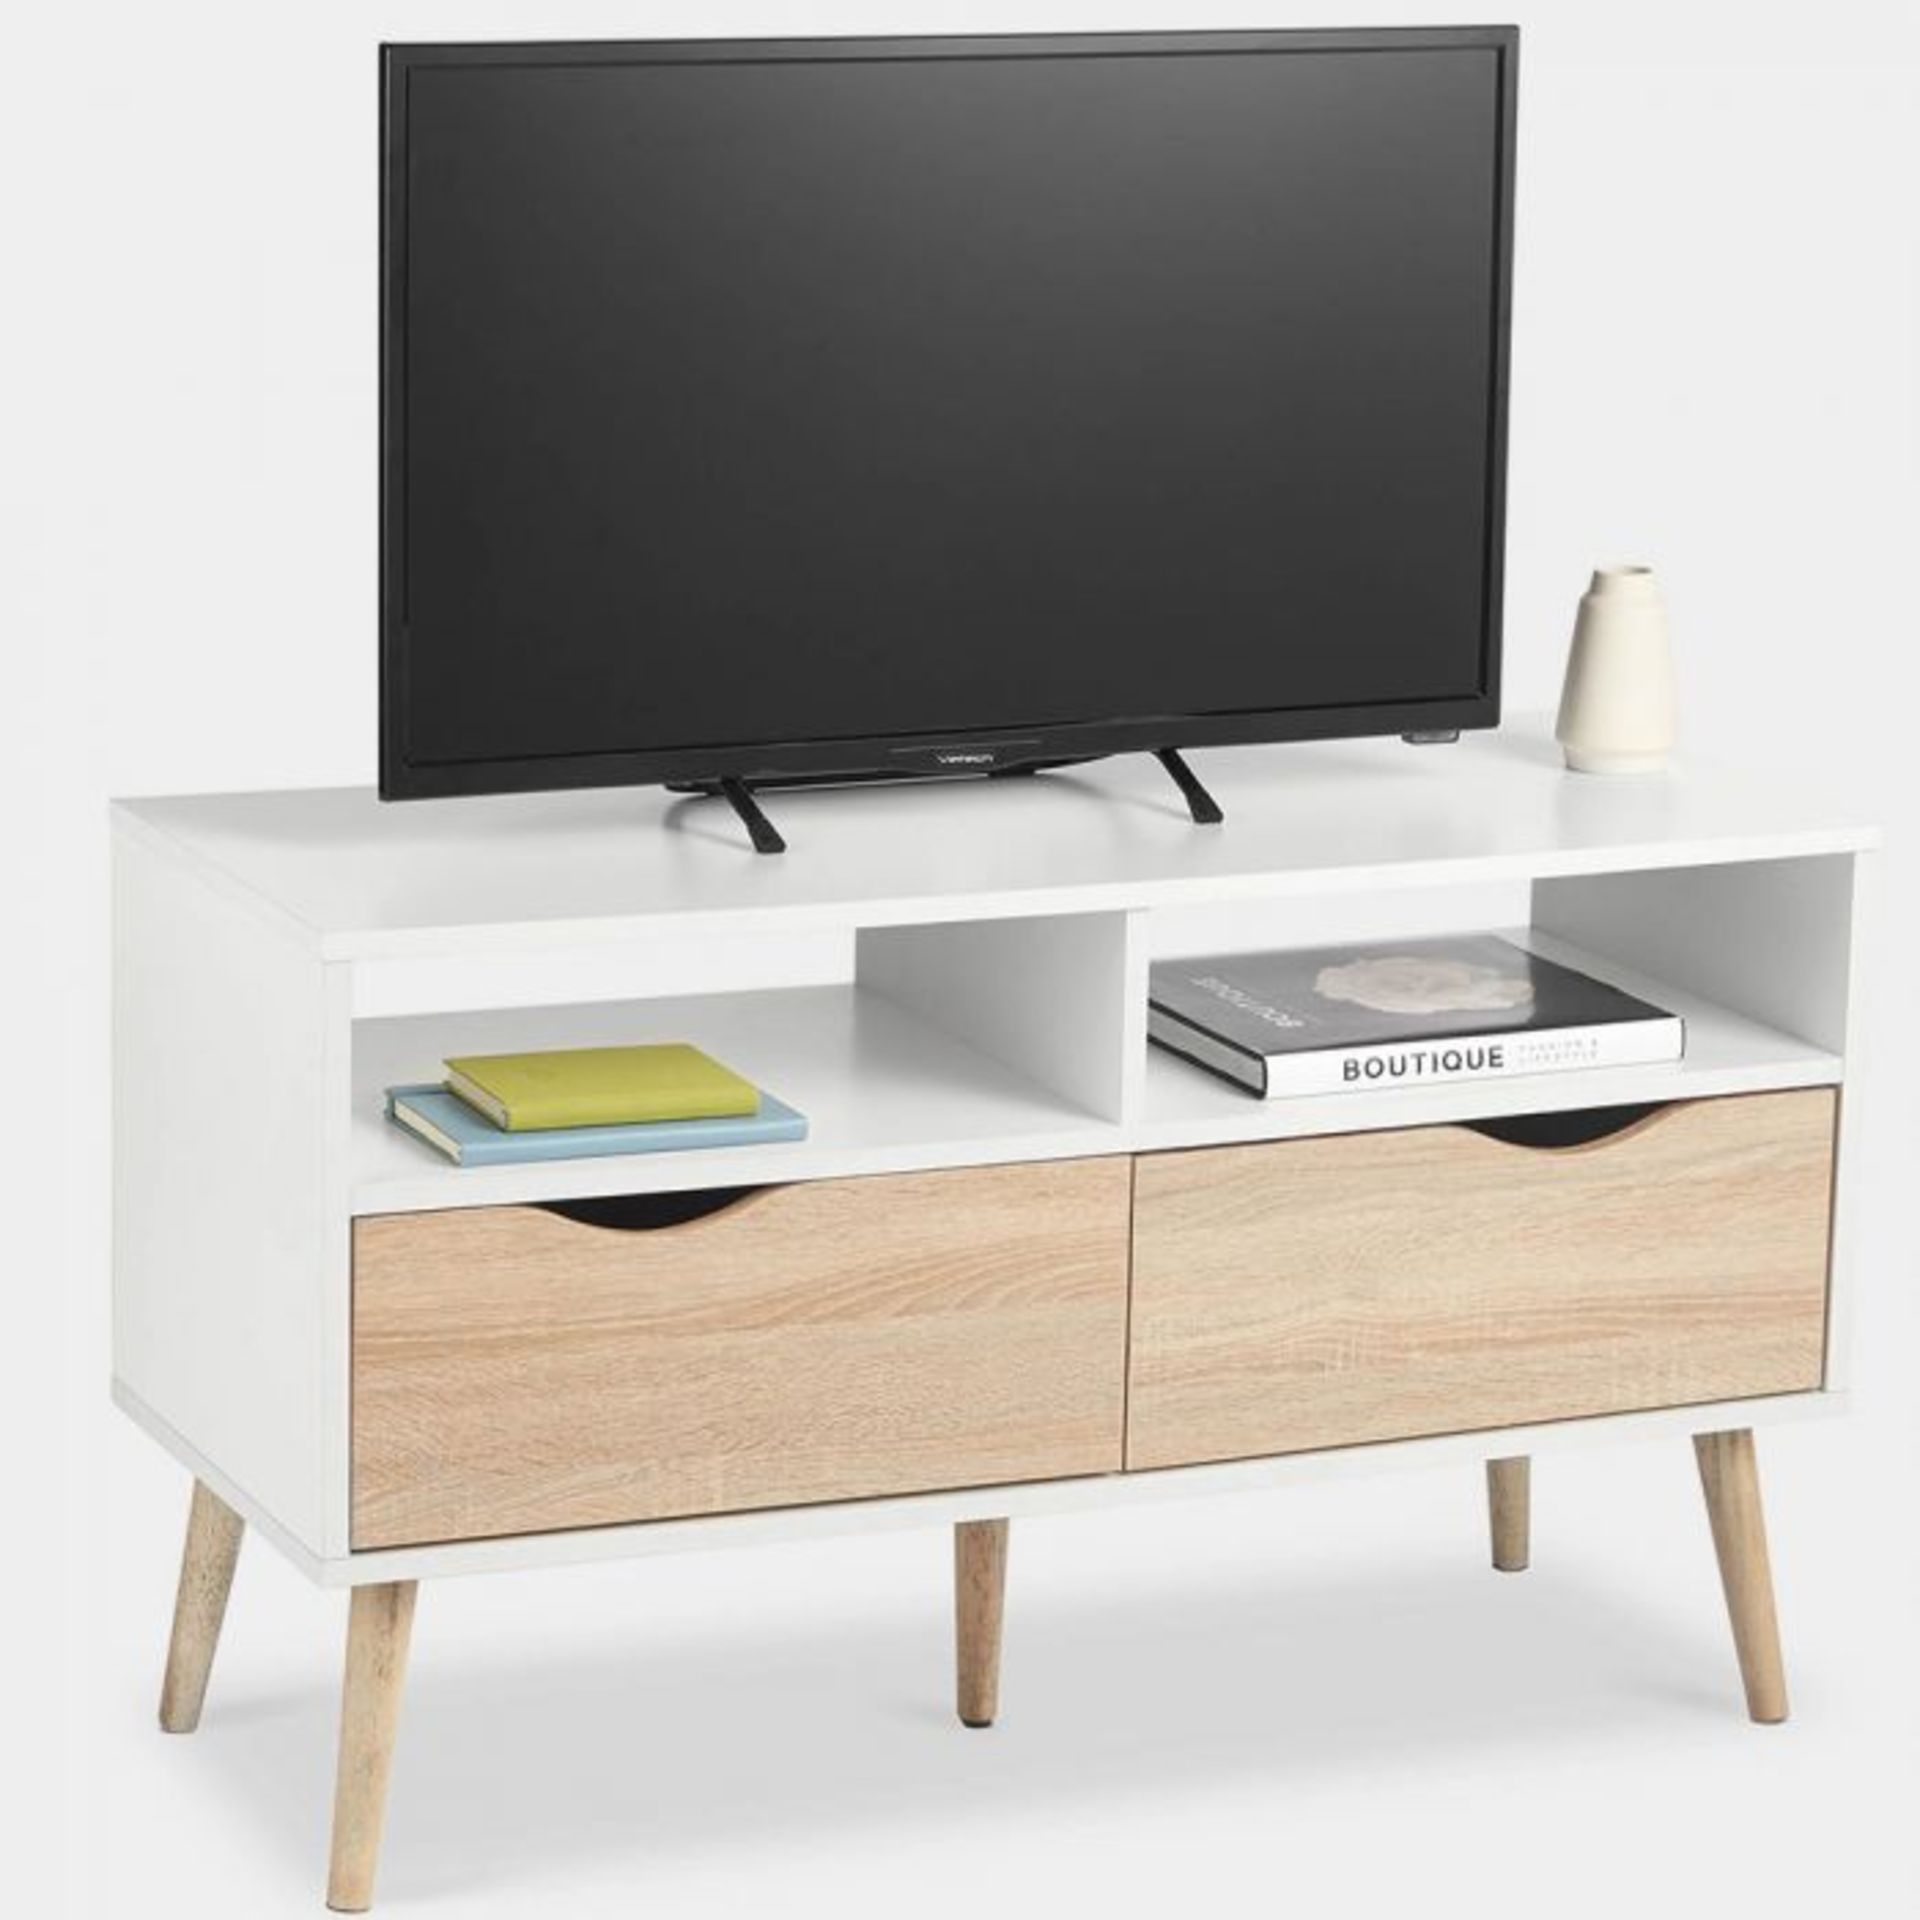 White & Oak Effect Small TV Unit. Whether you’re looking to bring some contemporary style to your